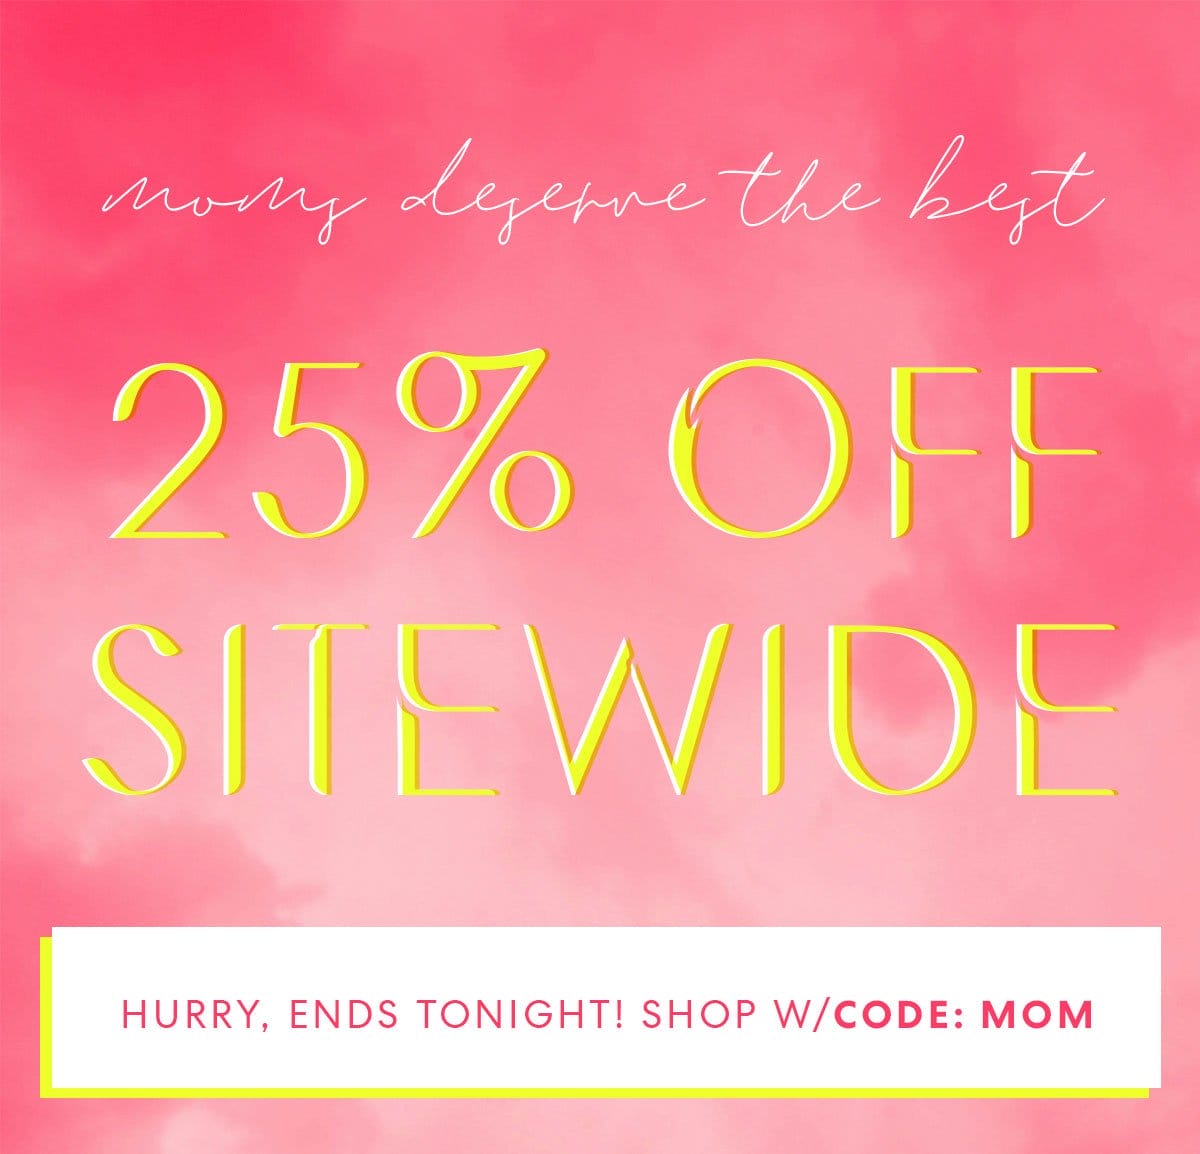 moms deserve the best | 25% OFF SITEWIDE | CODE: MOM | Ends Tonight!